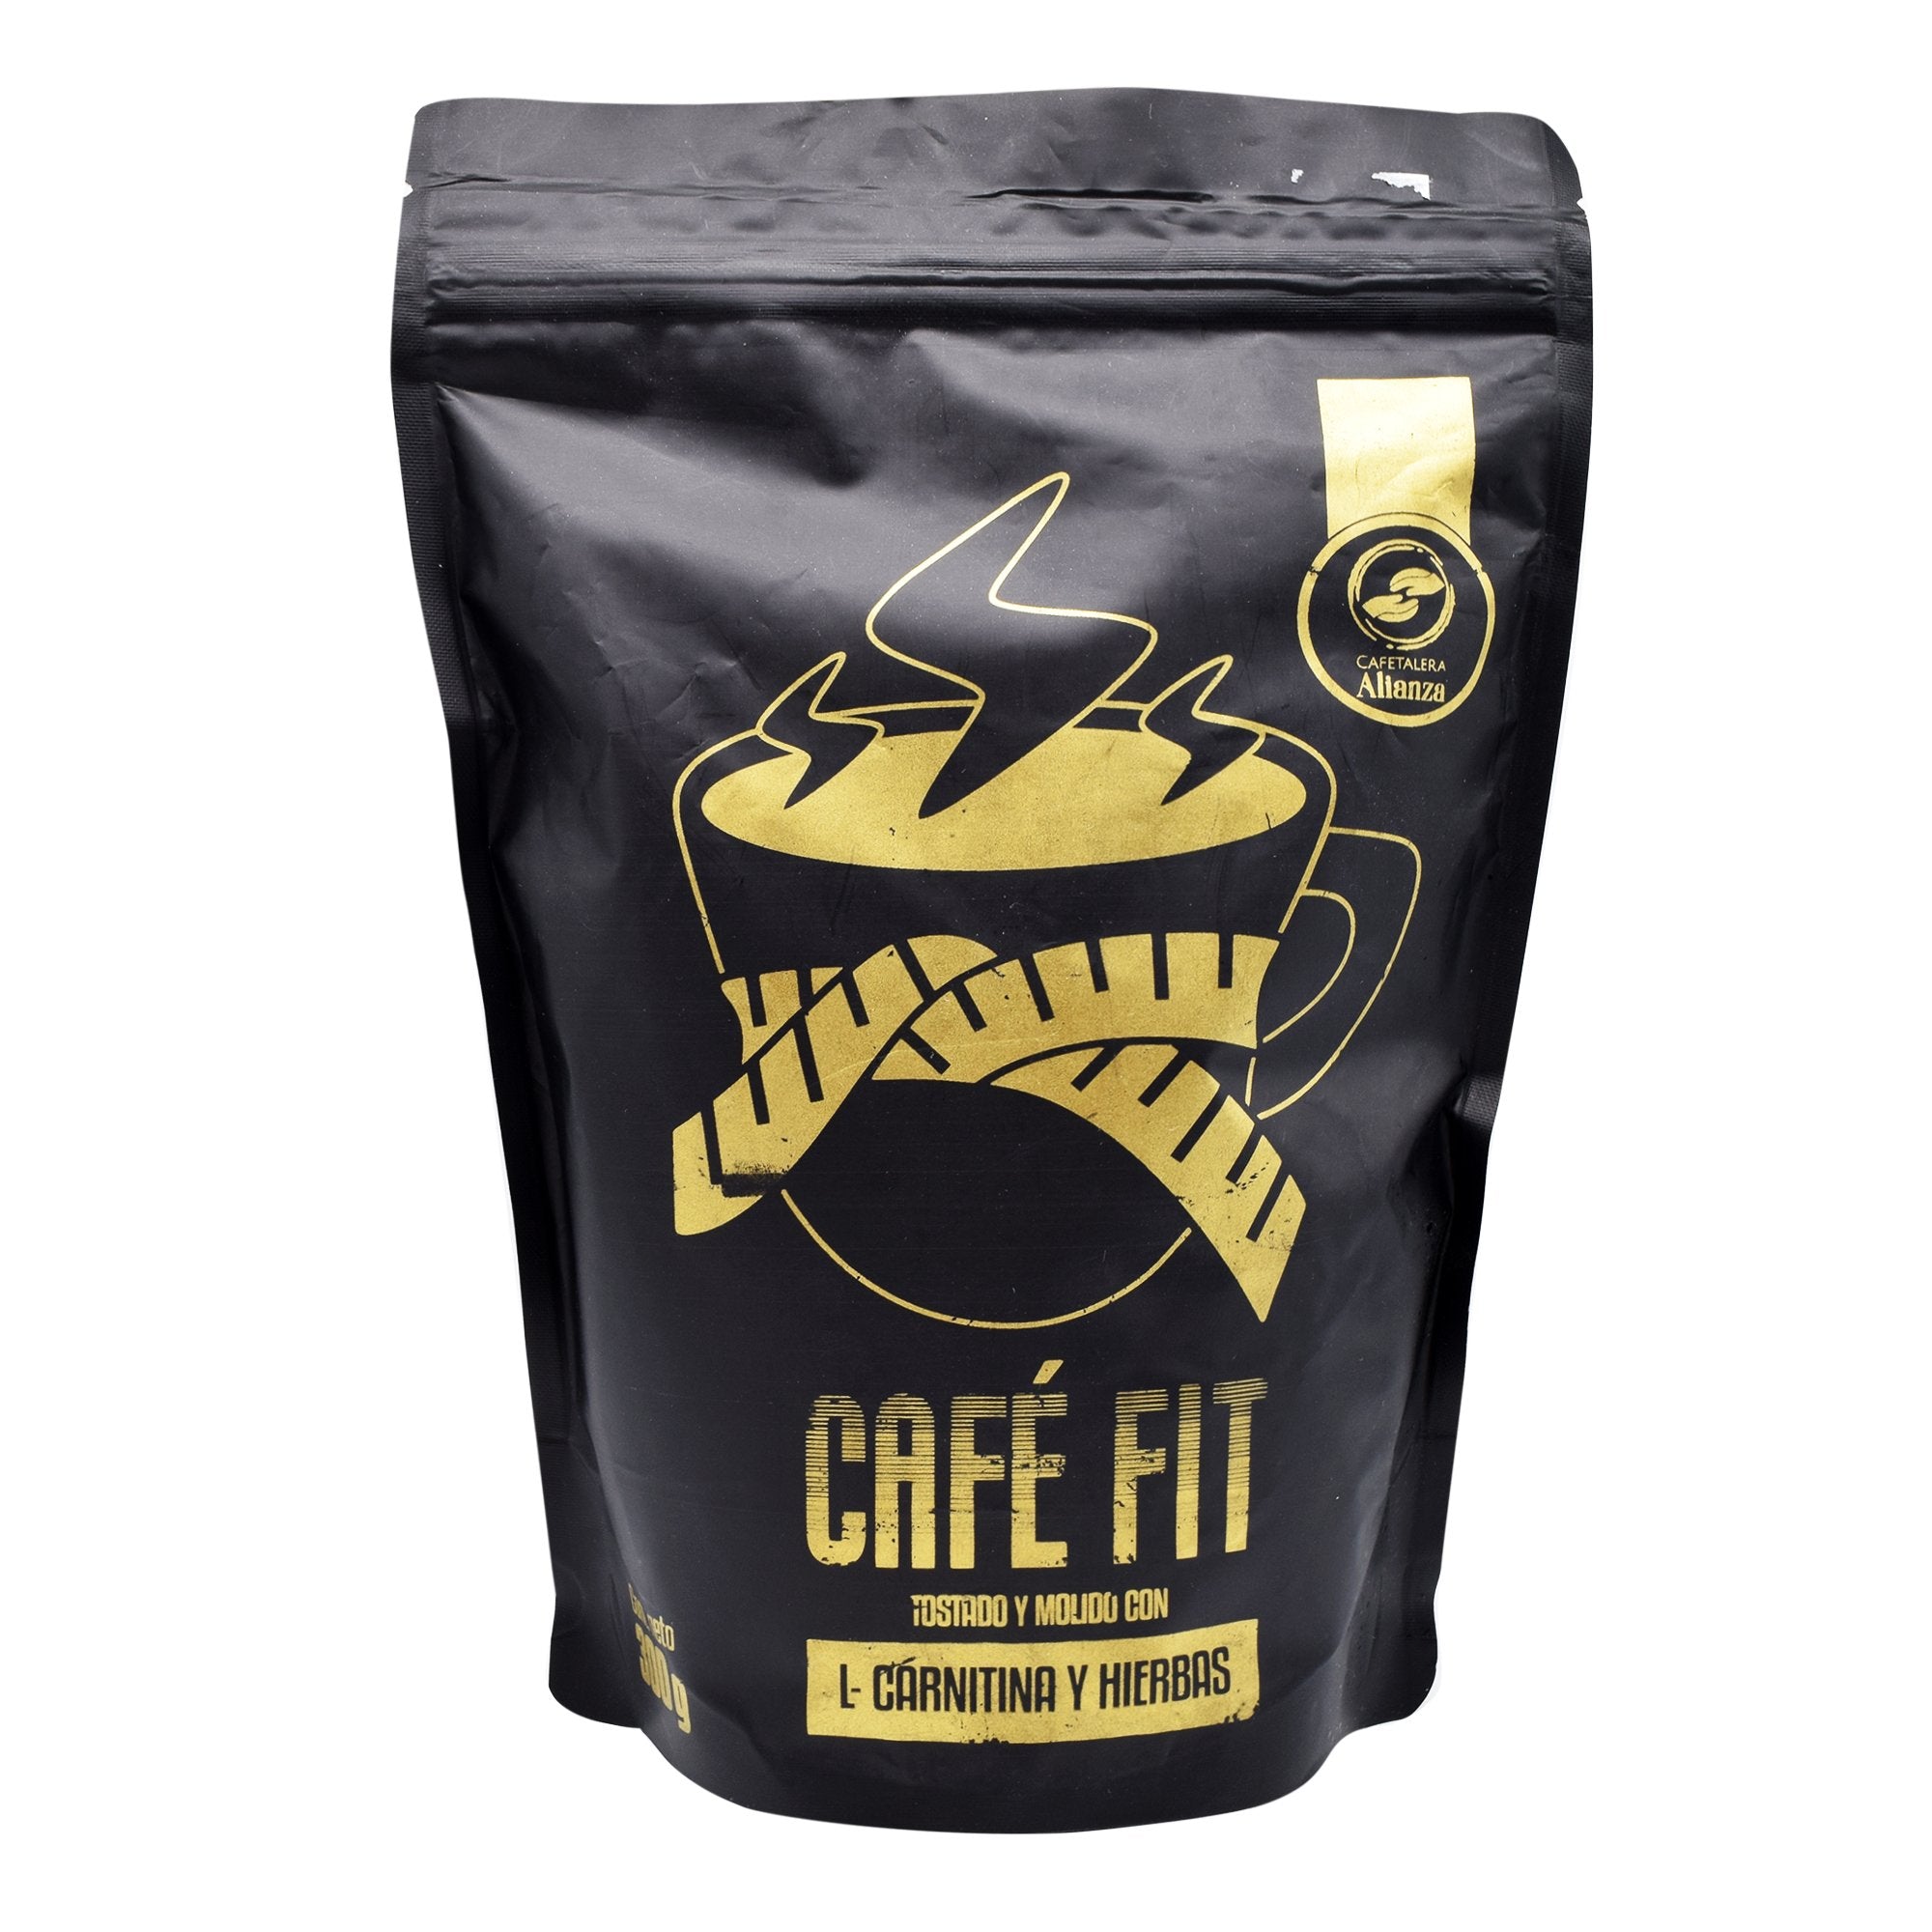 Cafe fit con l carnitina 300 g